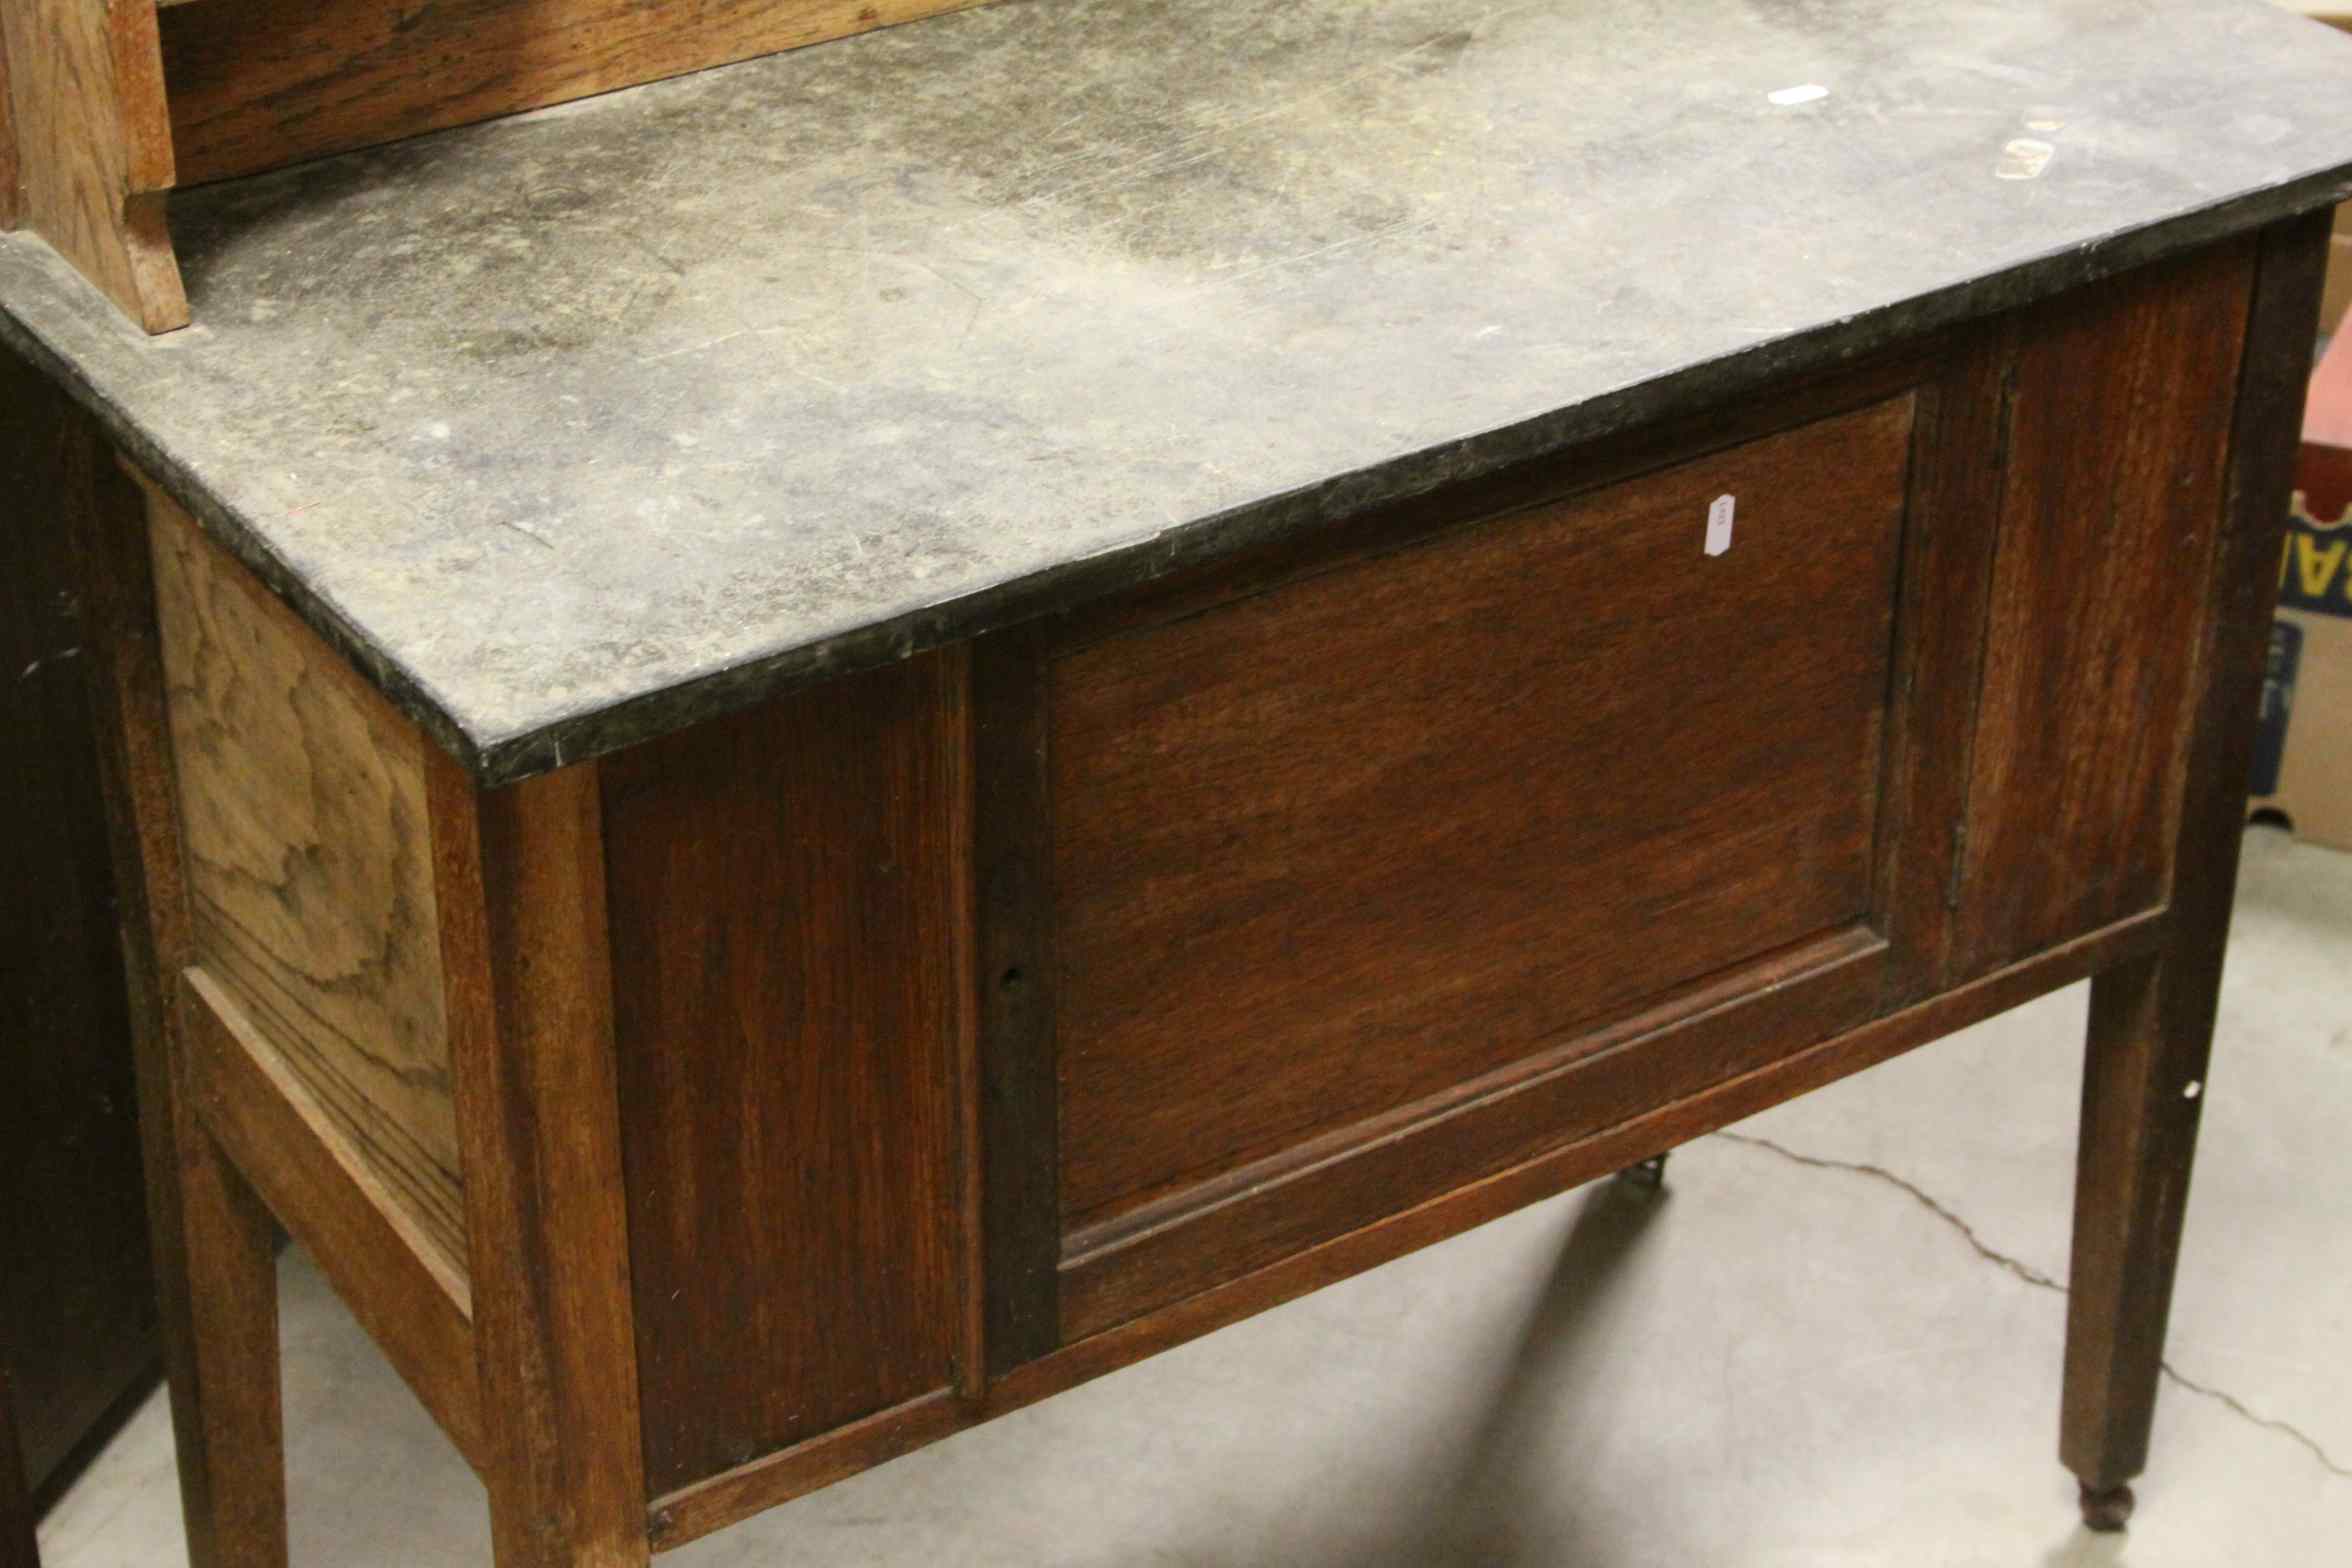 Late Victorian Oak Washstand with Green Tiled Back and Slate Top, 92cms wide x 115cms high - Image 3 of 3